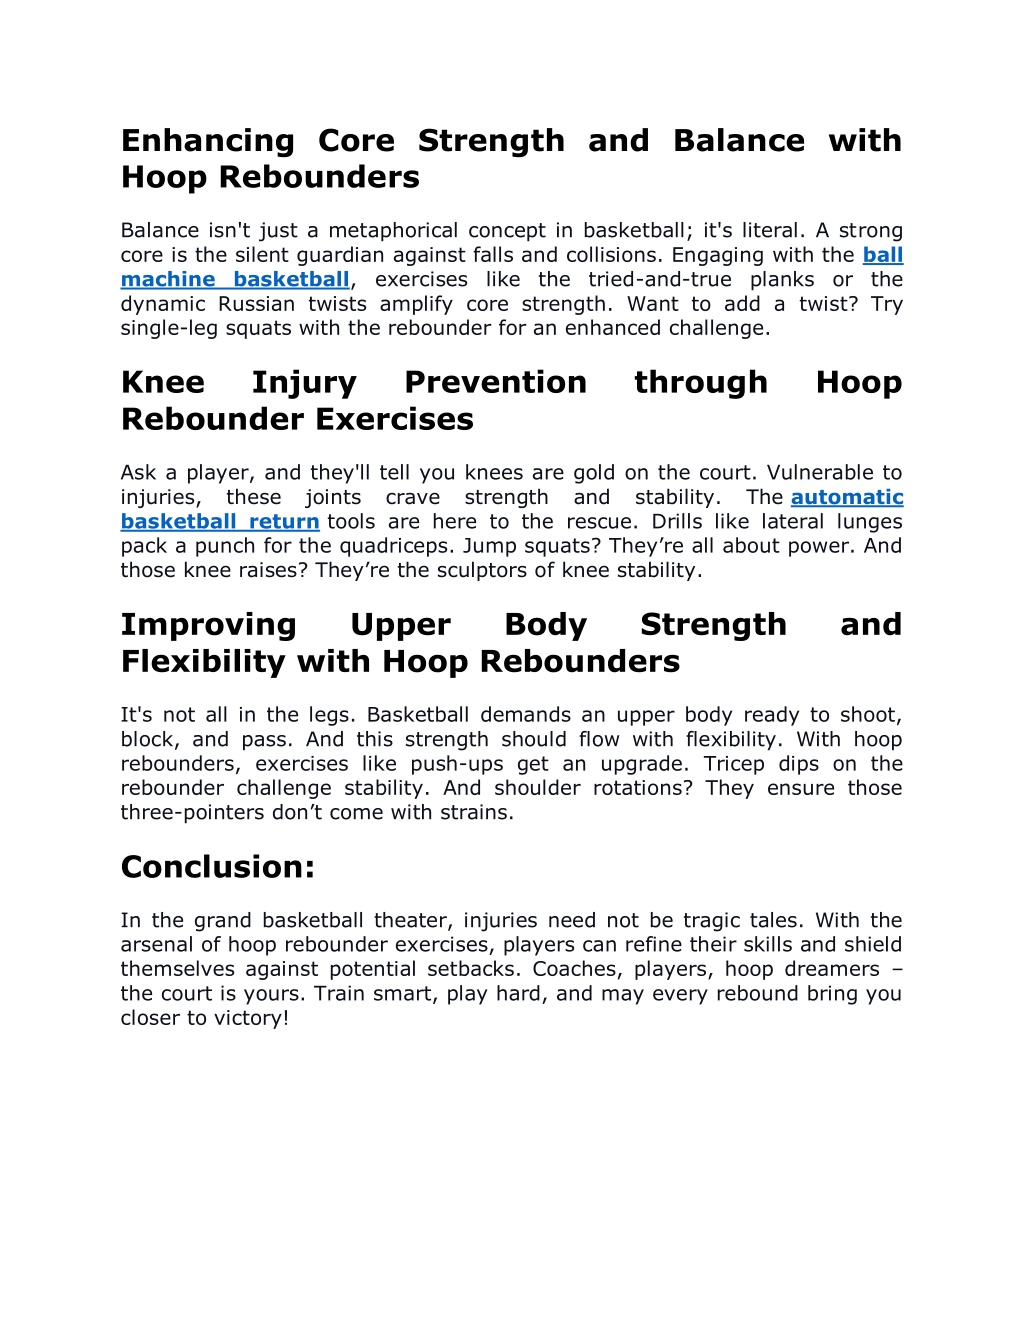 PPT - Preventing Basketball Injuries with Hoop Rebounder Exercises ...